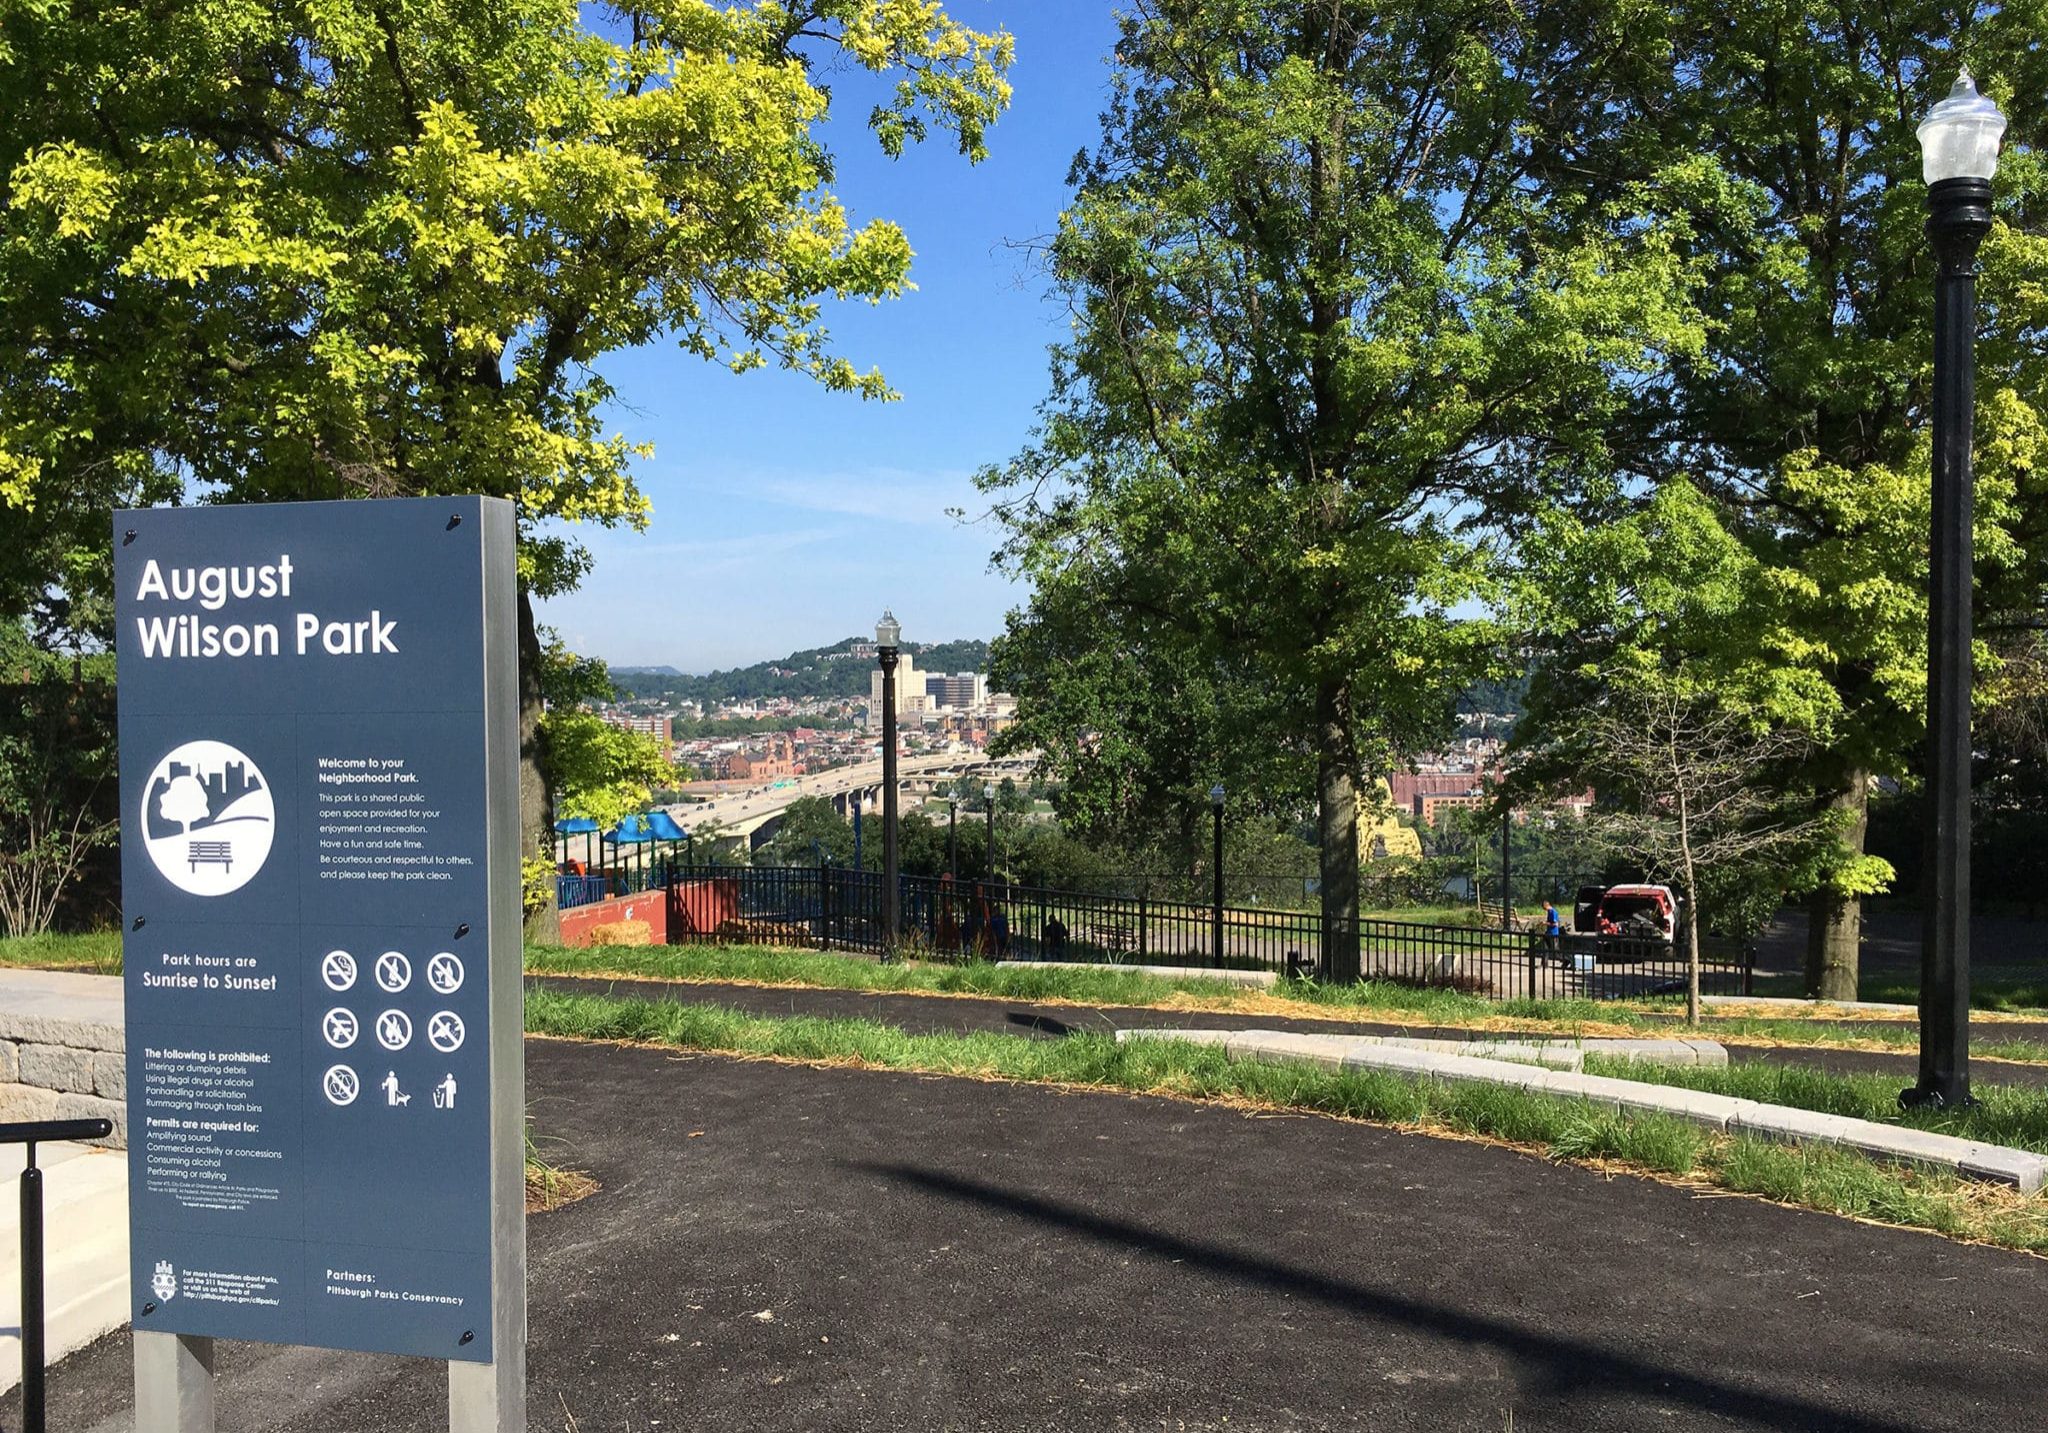 A sign displaying August Wilson Park